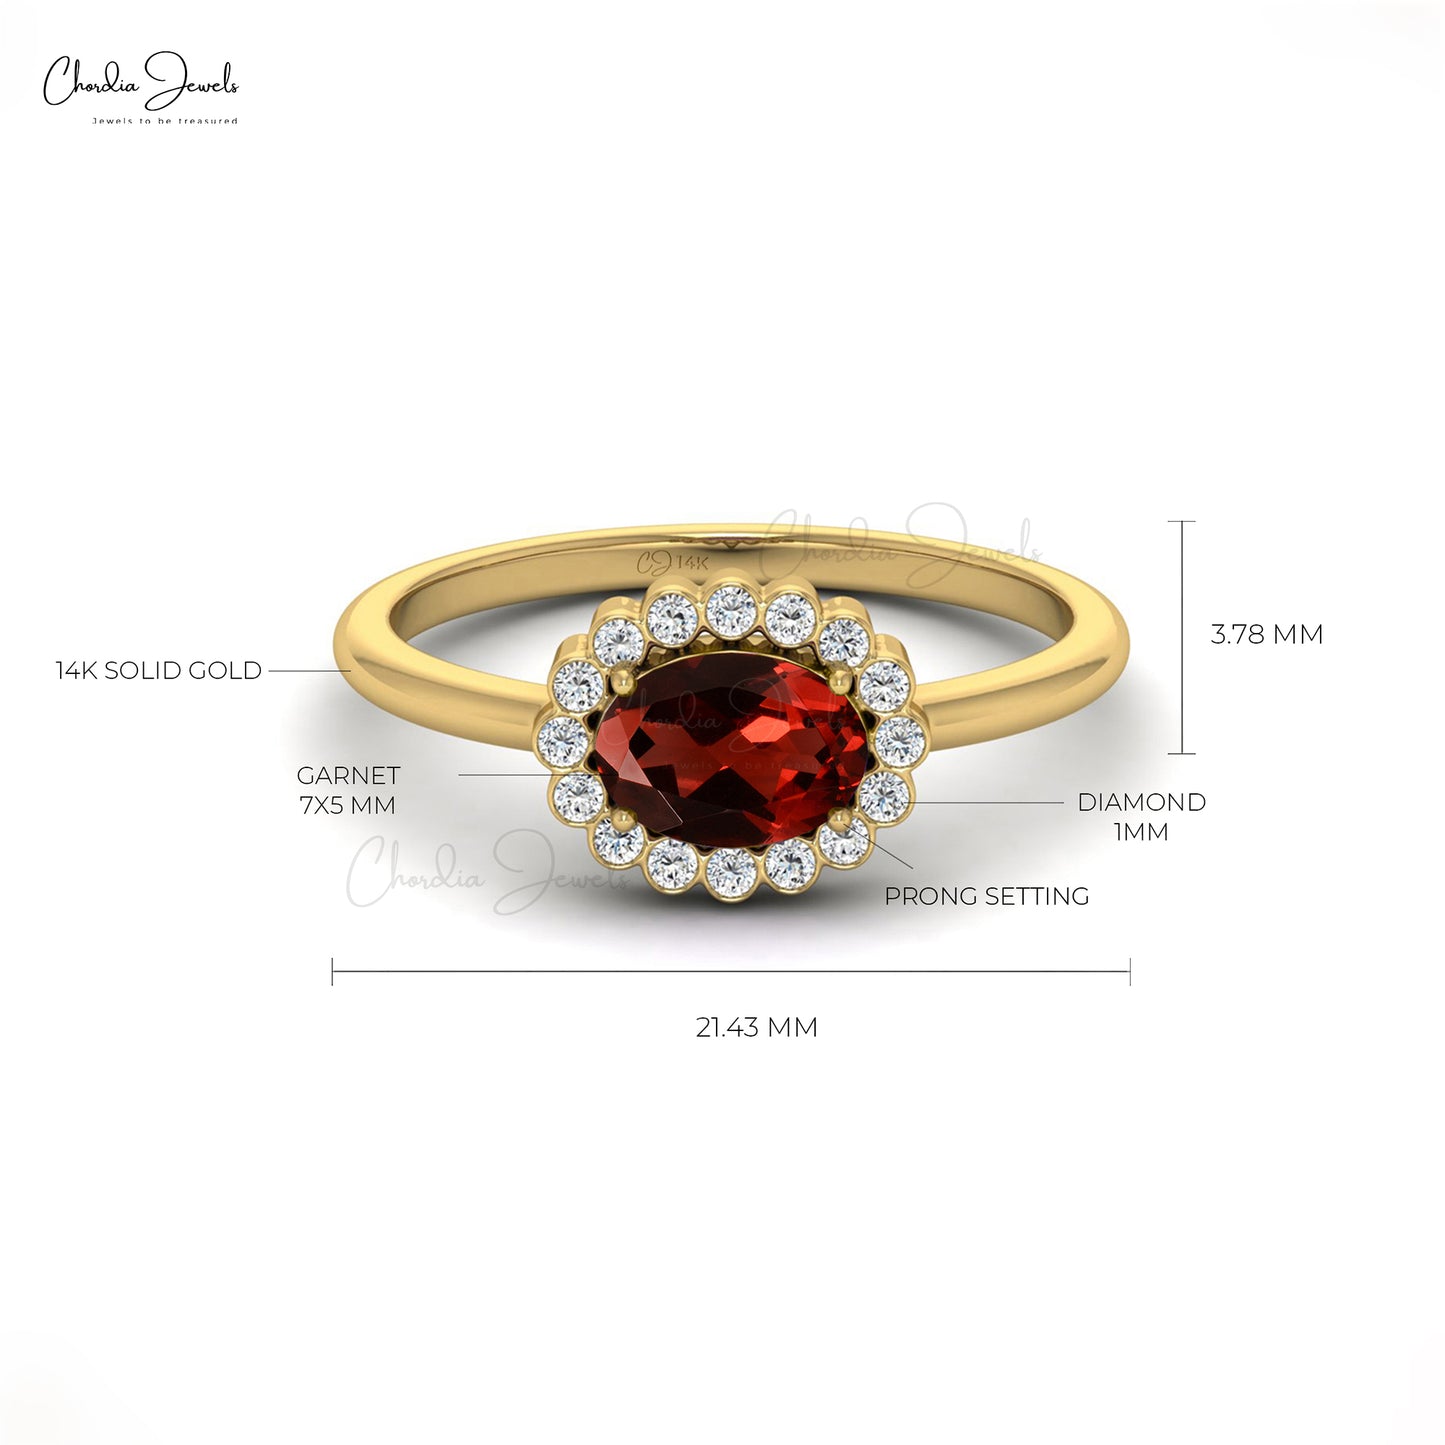 Oval Shaped 7x5mm Garnet Diamond Halo Ring for Her